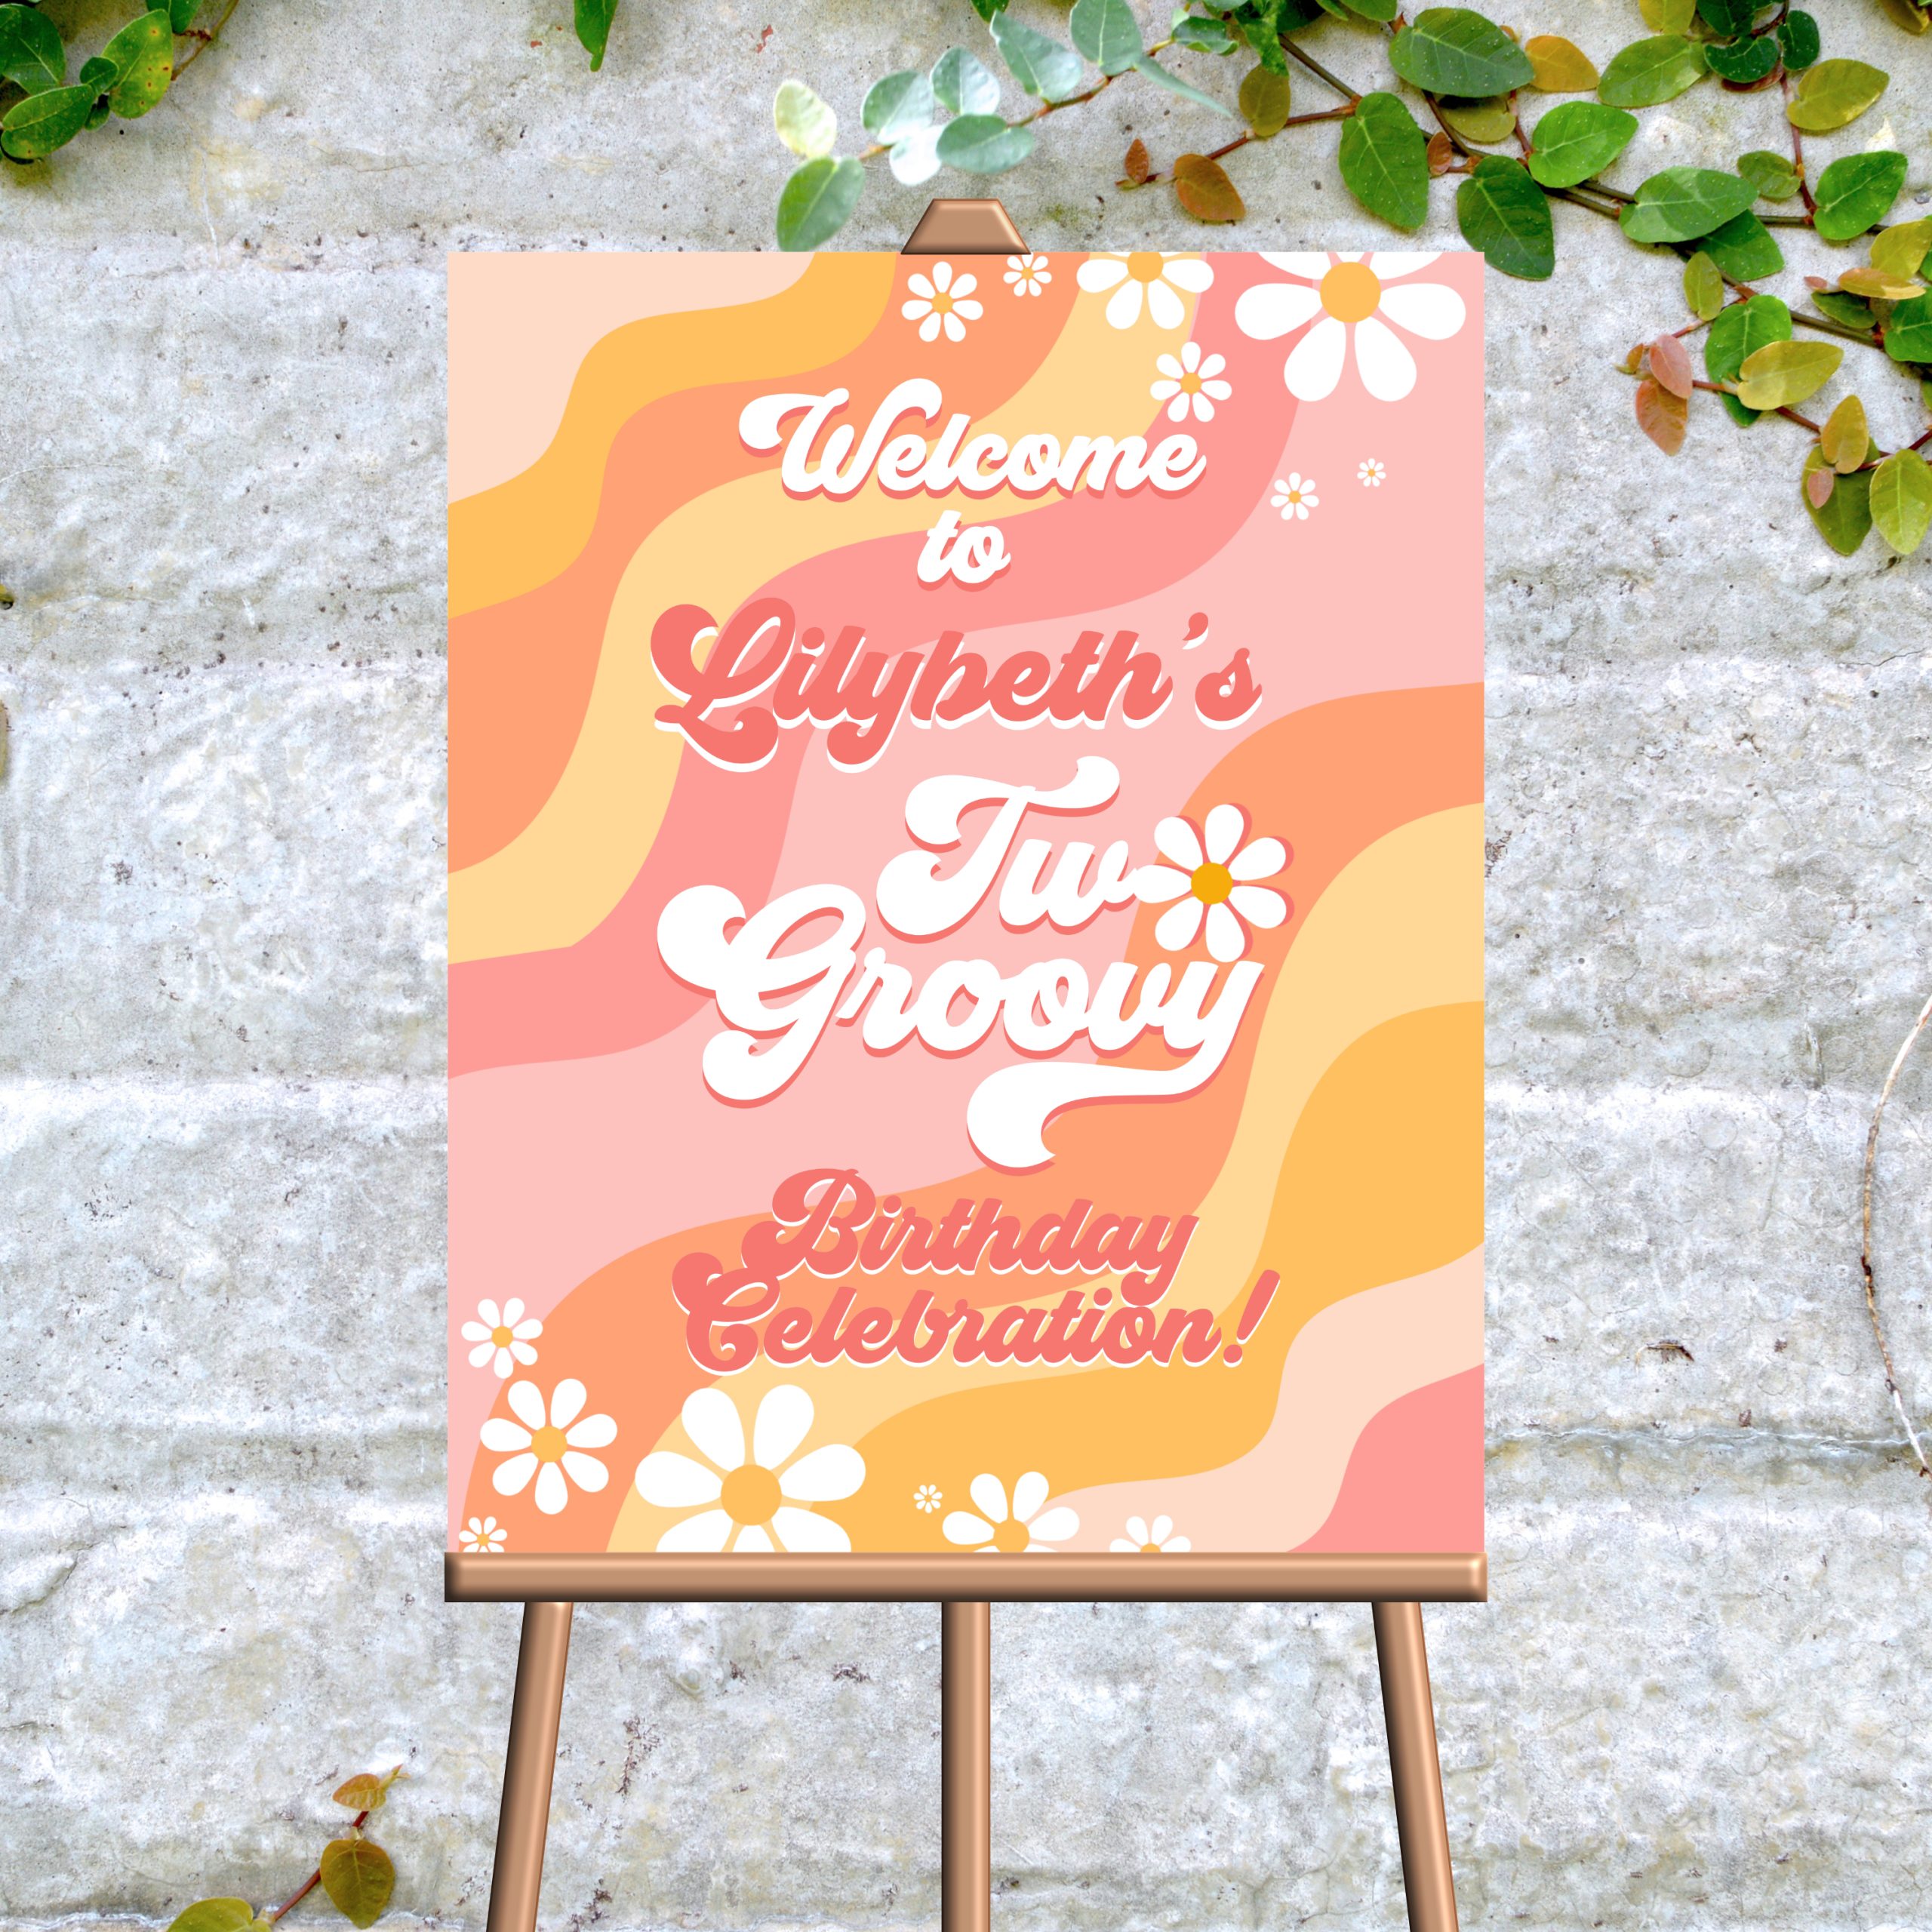 DECOR | SIGNS Editable Two Groovy Birthday Welcome Sign, PRINTABLE, Daisy Orange Boho Theme 2nd Birthday Party Decorations